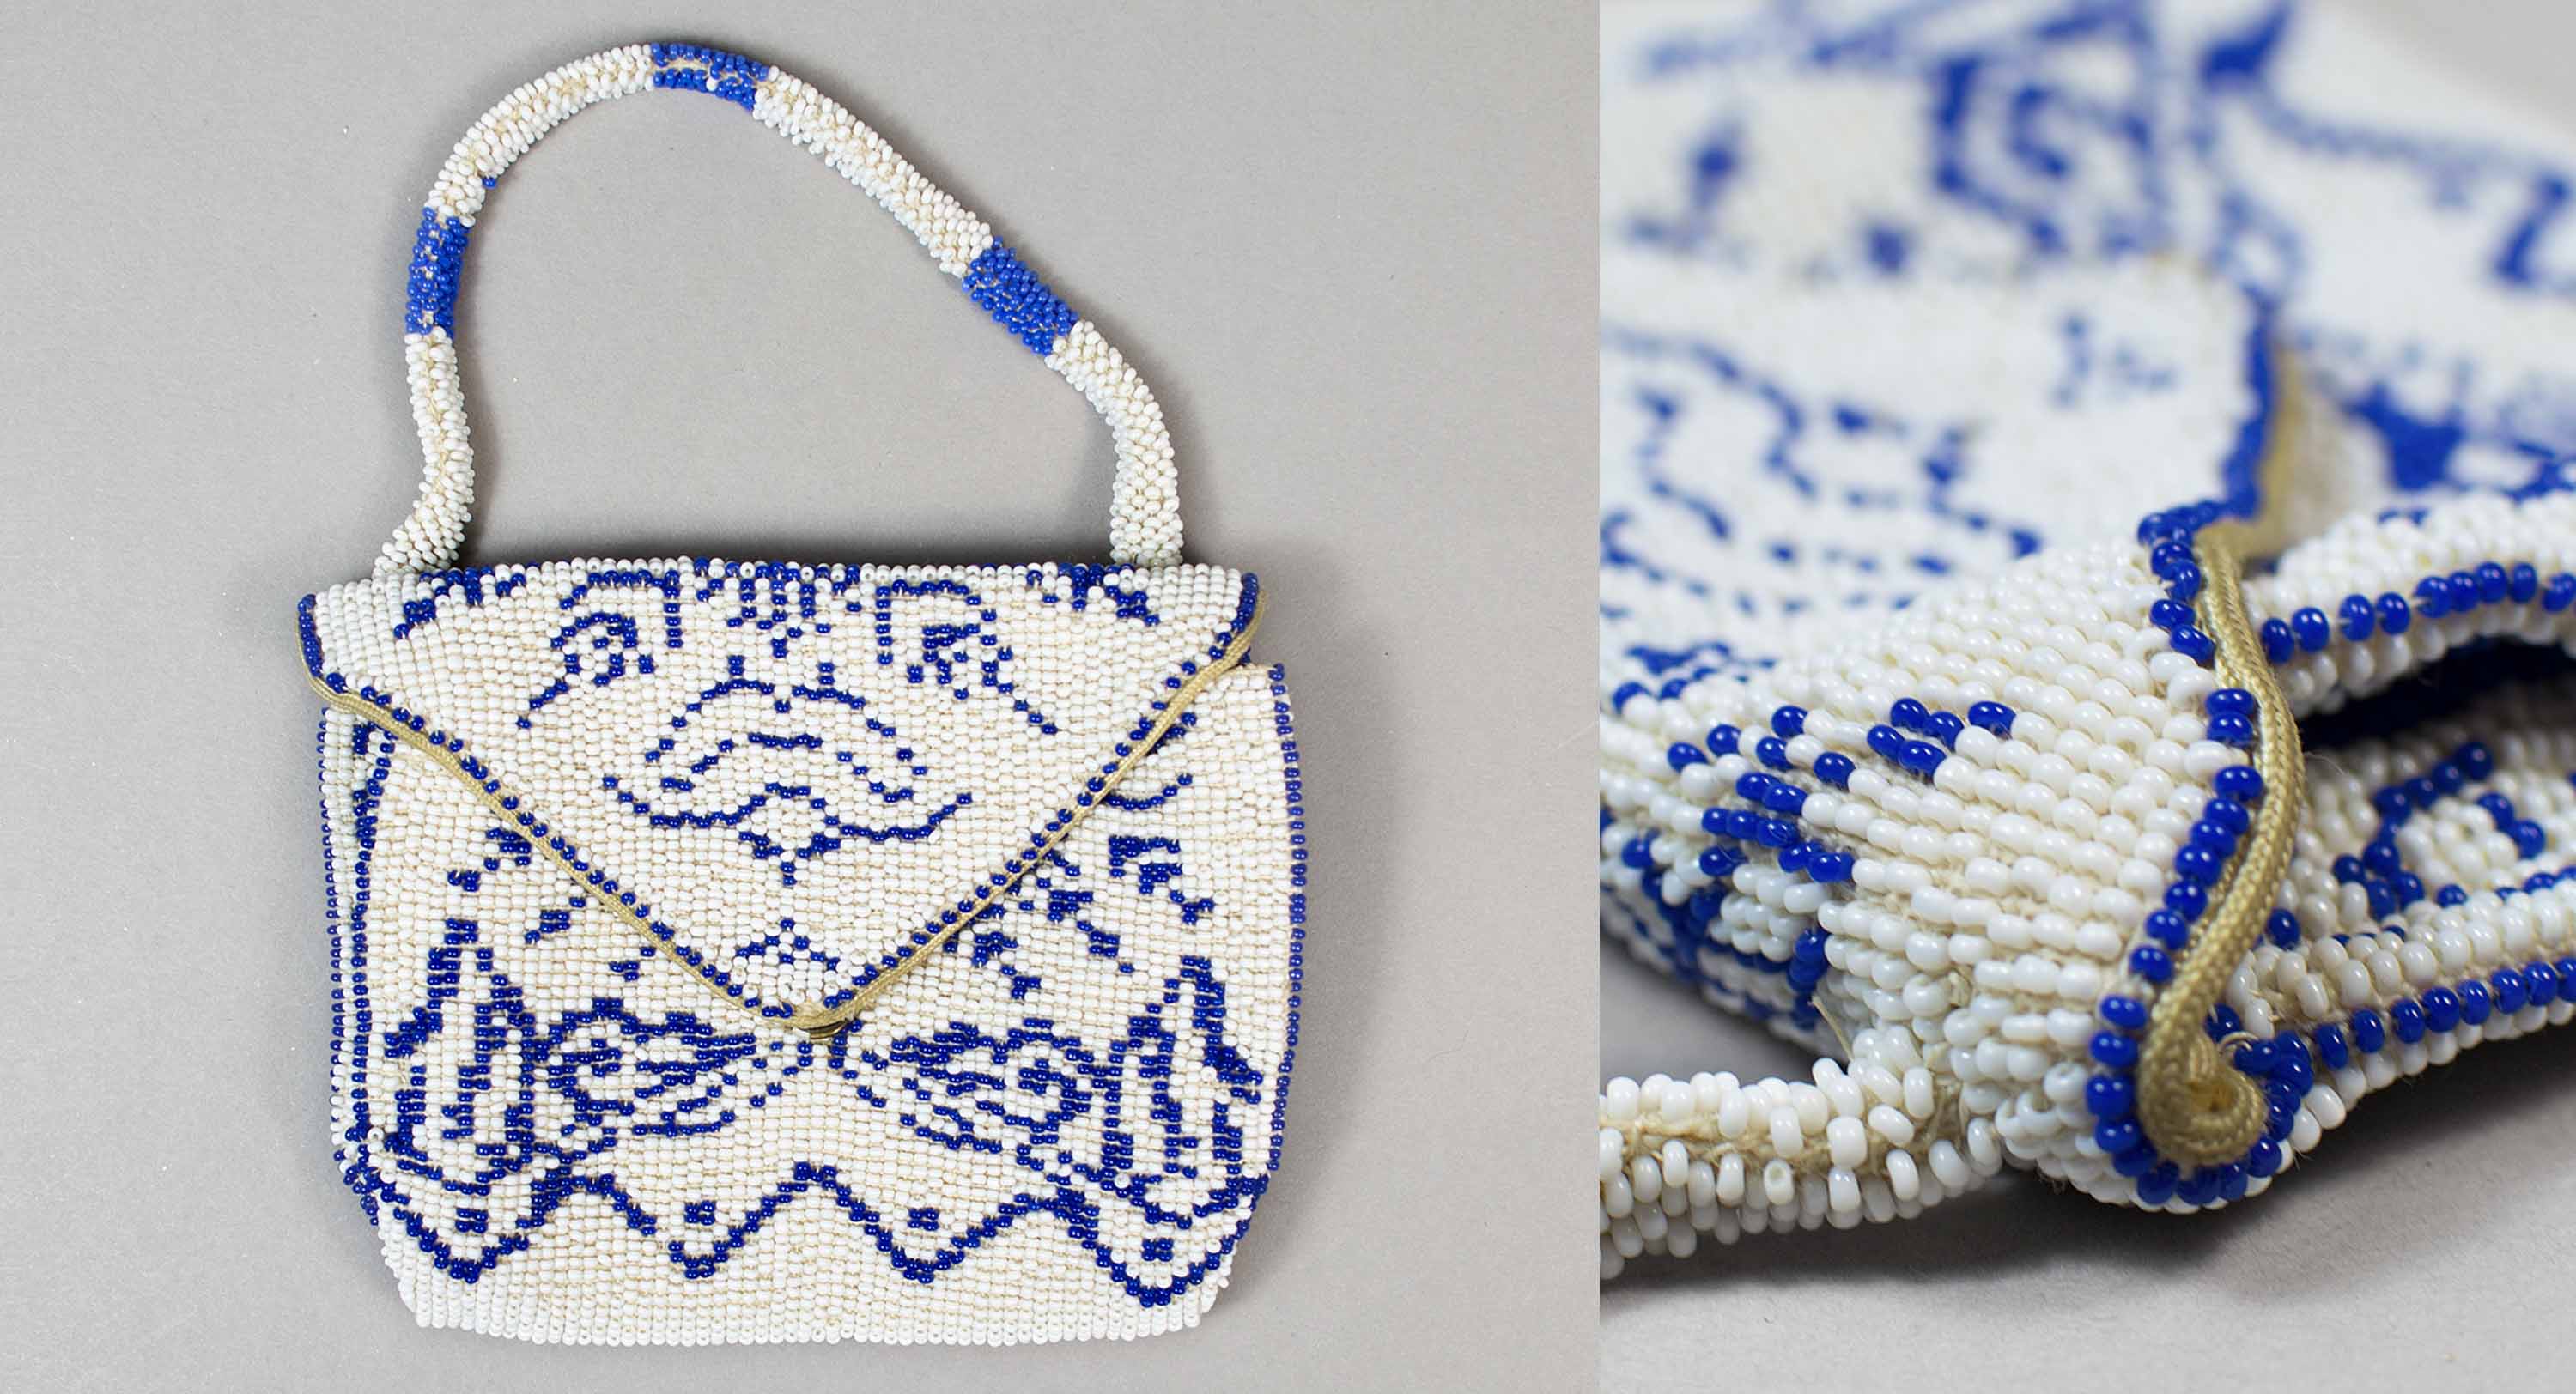 An envelope flap evening purse with white and blue beading on the left and a close up of the beading on the right